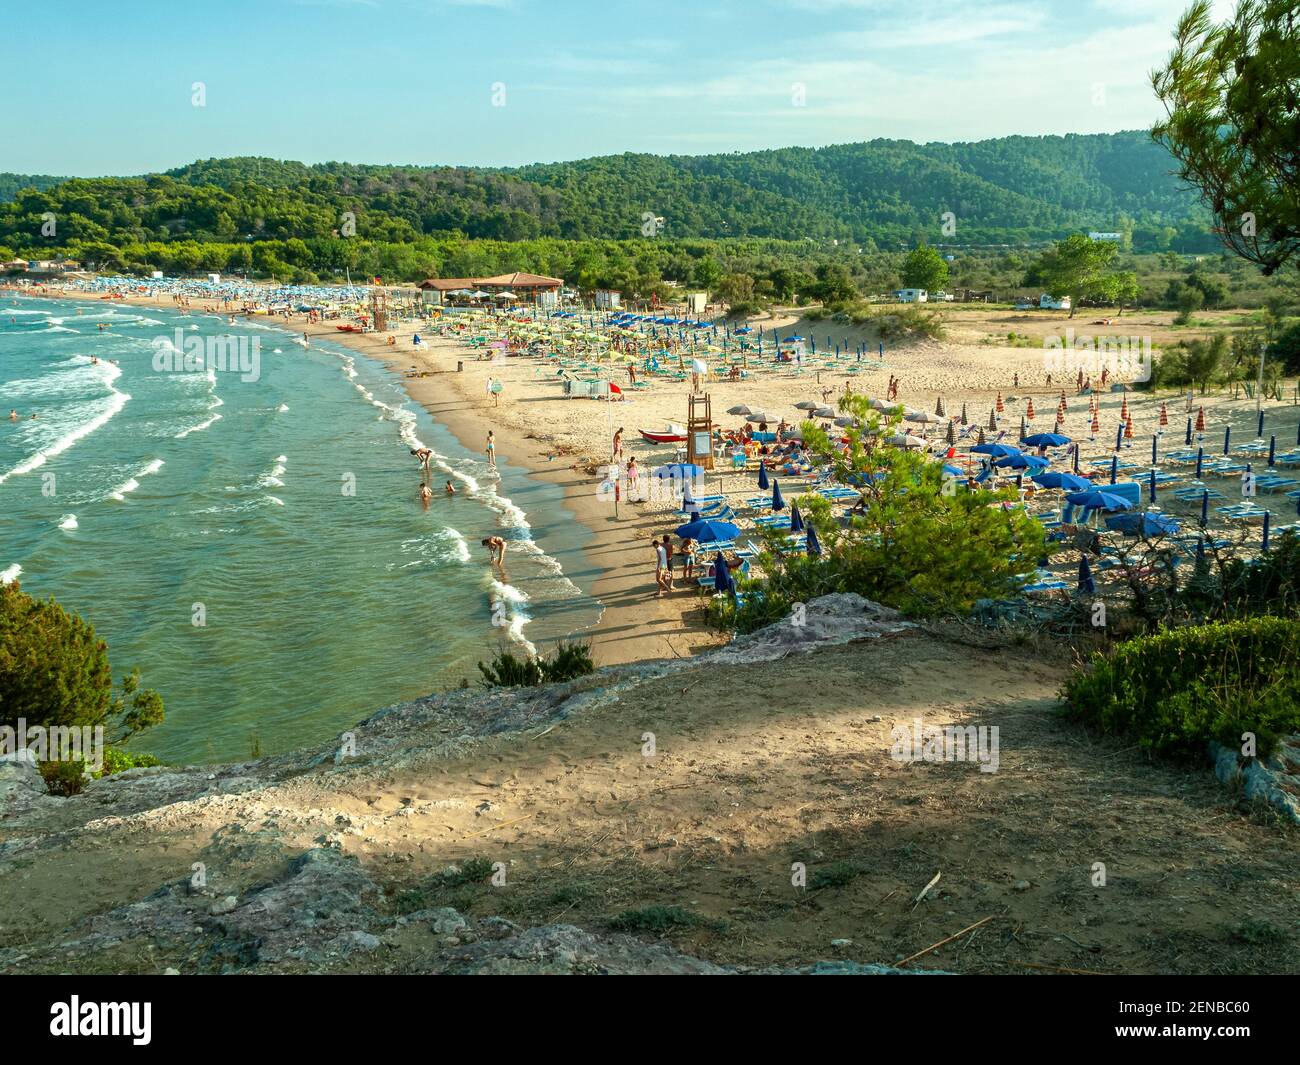 Tourist beach with umbrellas and deck chairs in the Gargano. Puglia, Italy, Europe Stock Photo